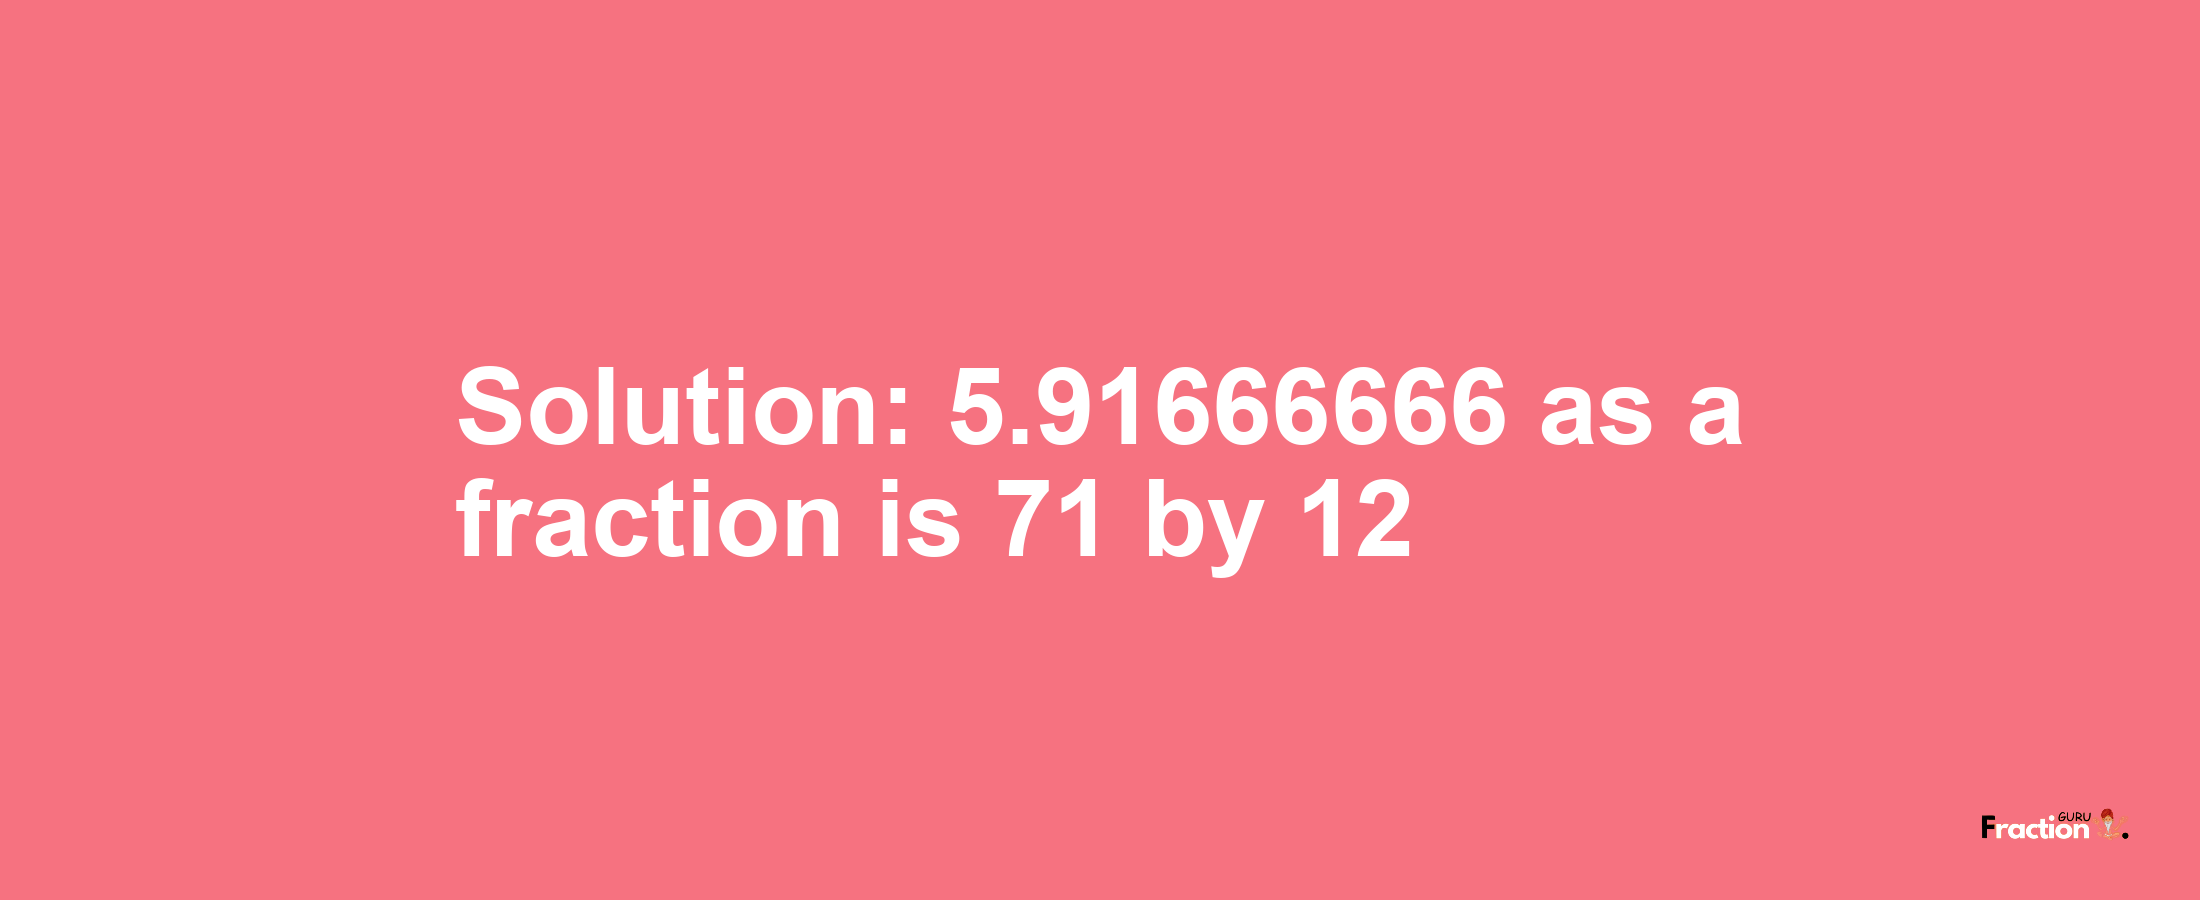 Solution:5.91666666 as a fraction is 71/12